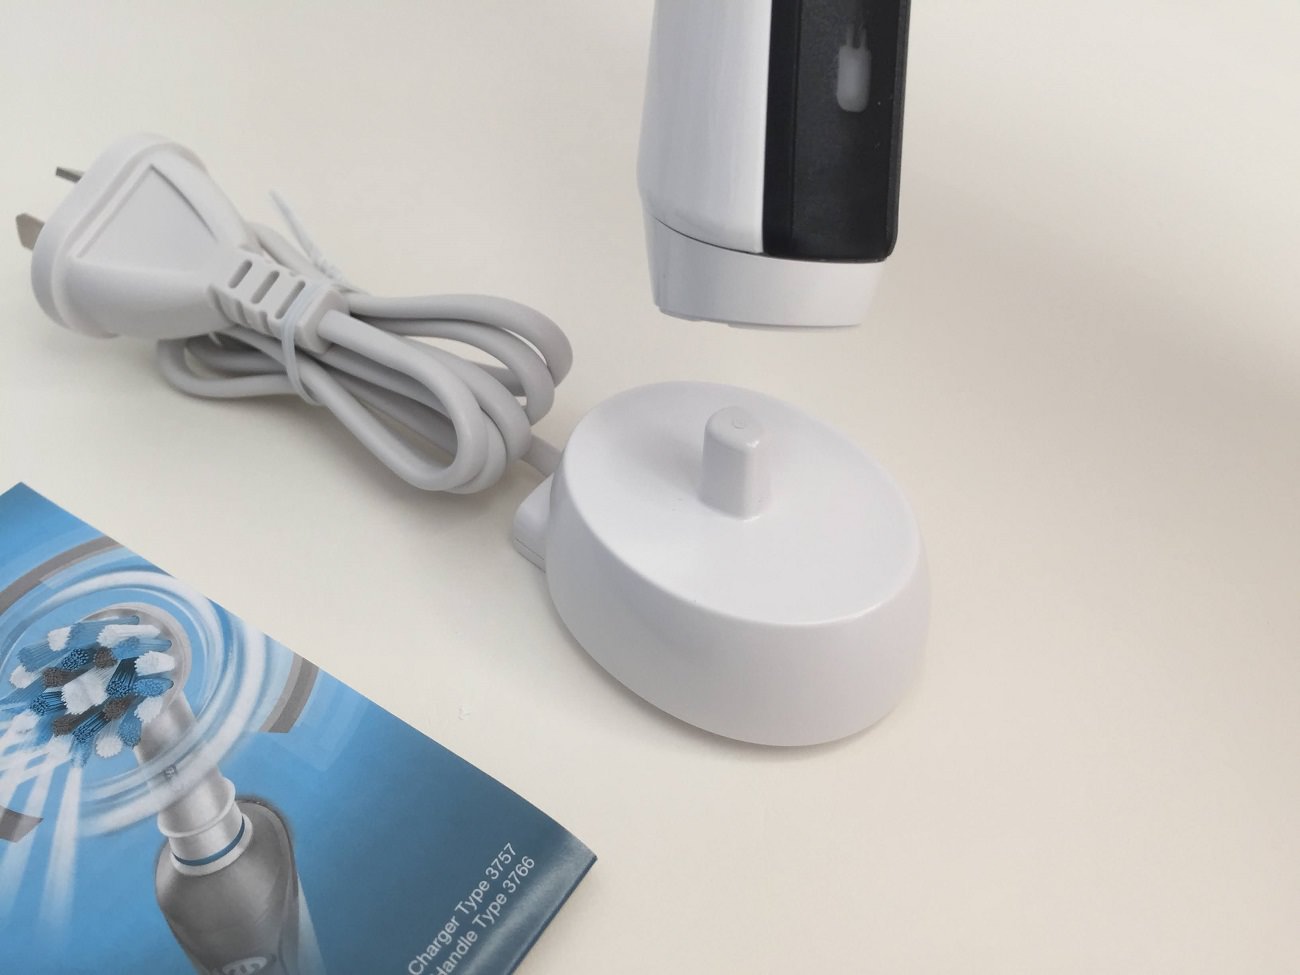 Oral-Bs charger for the Pro 2000 Electric Toothbrush